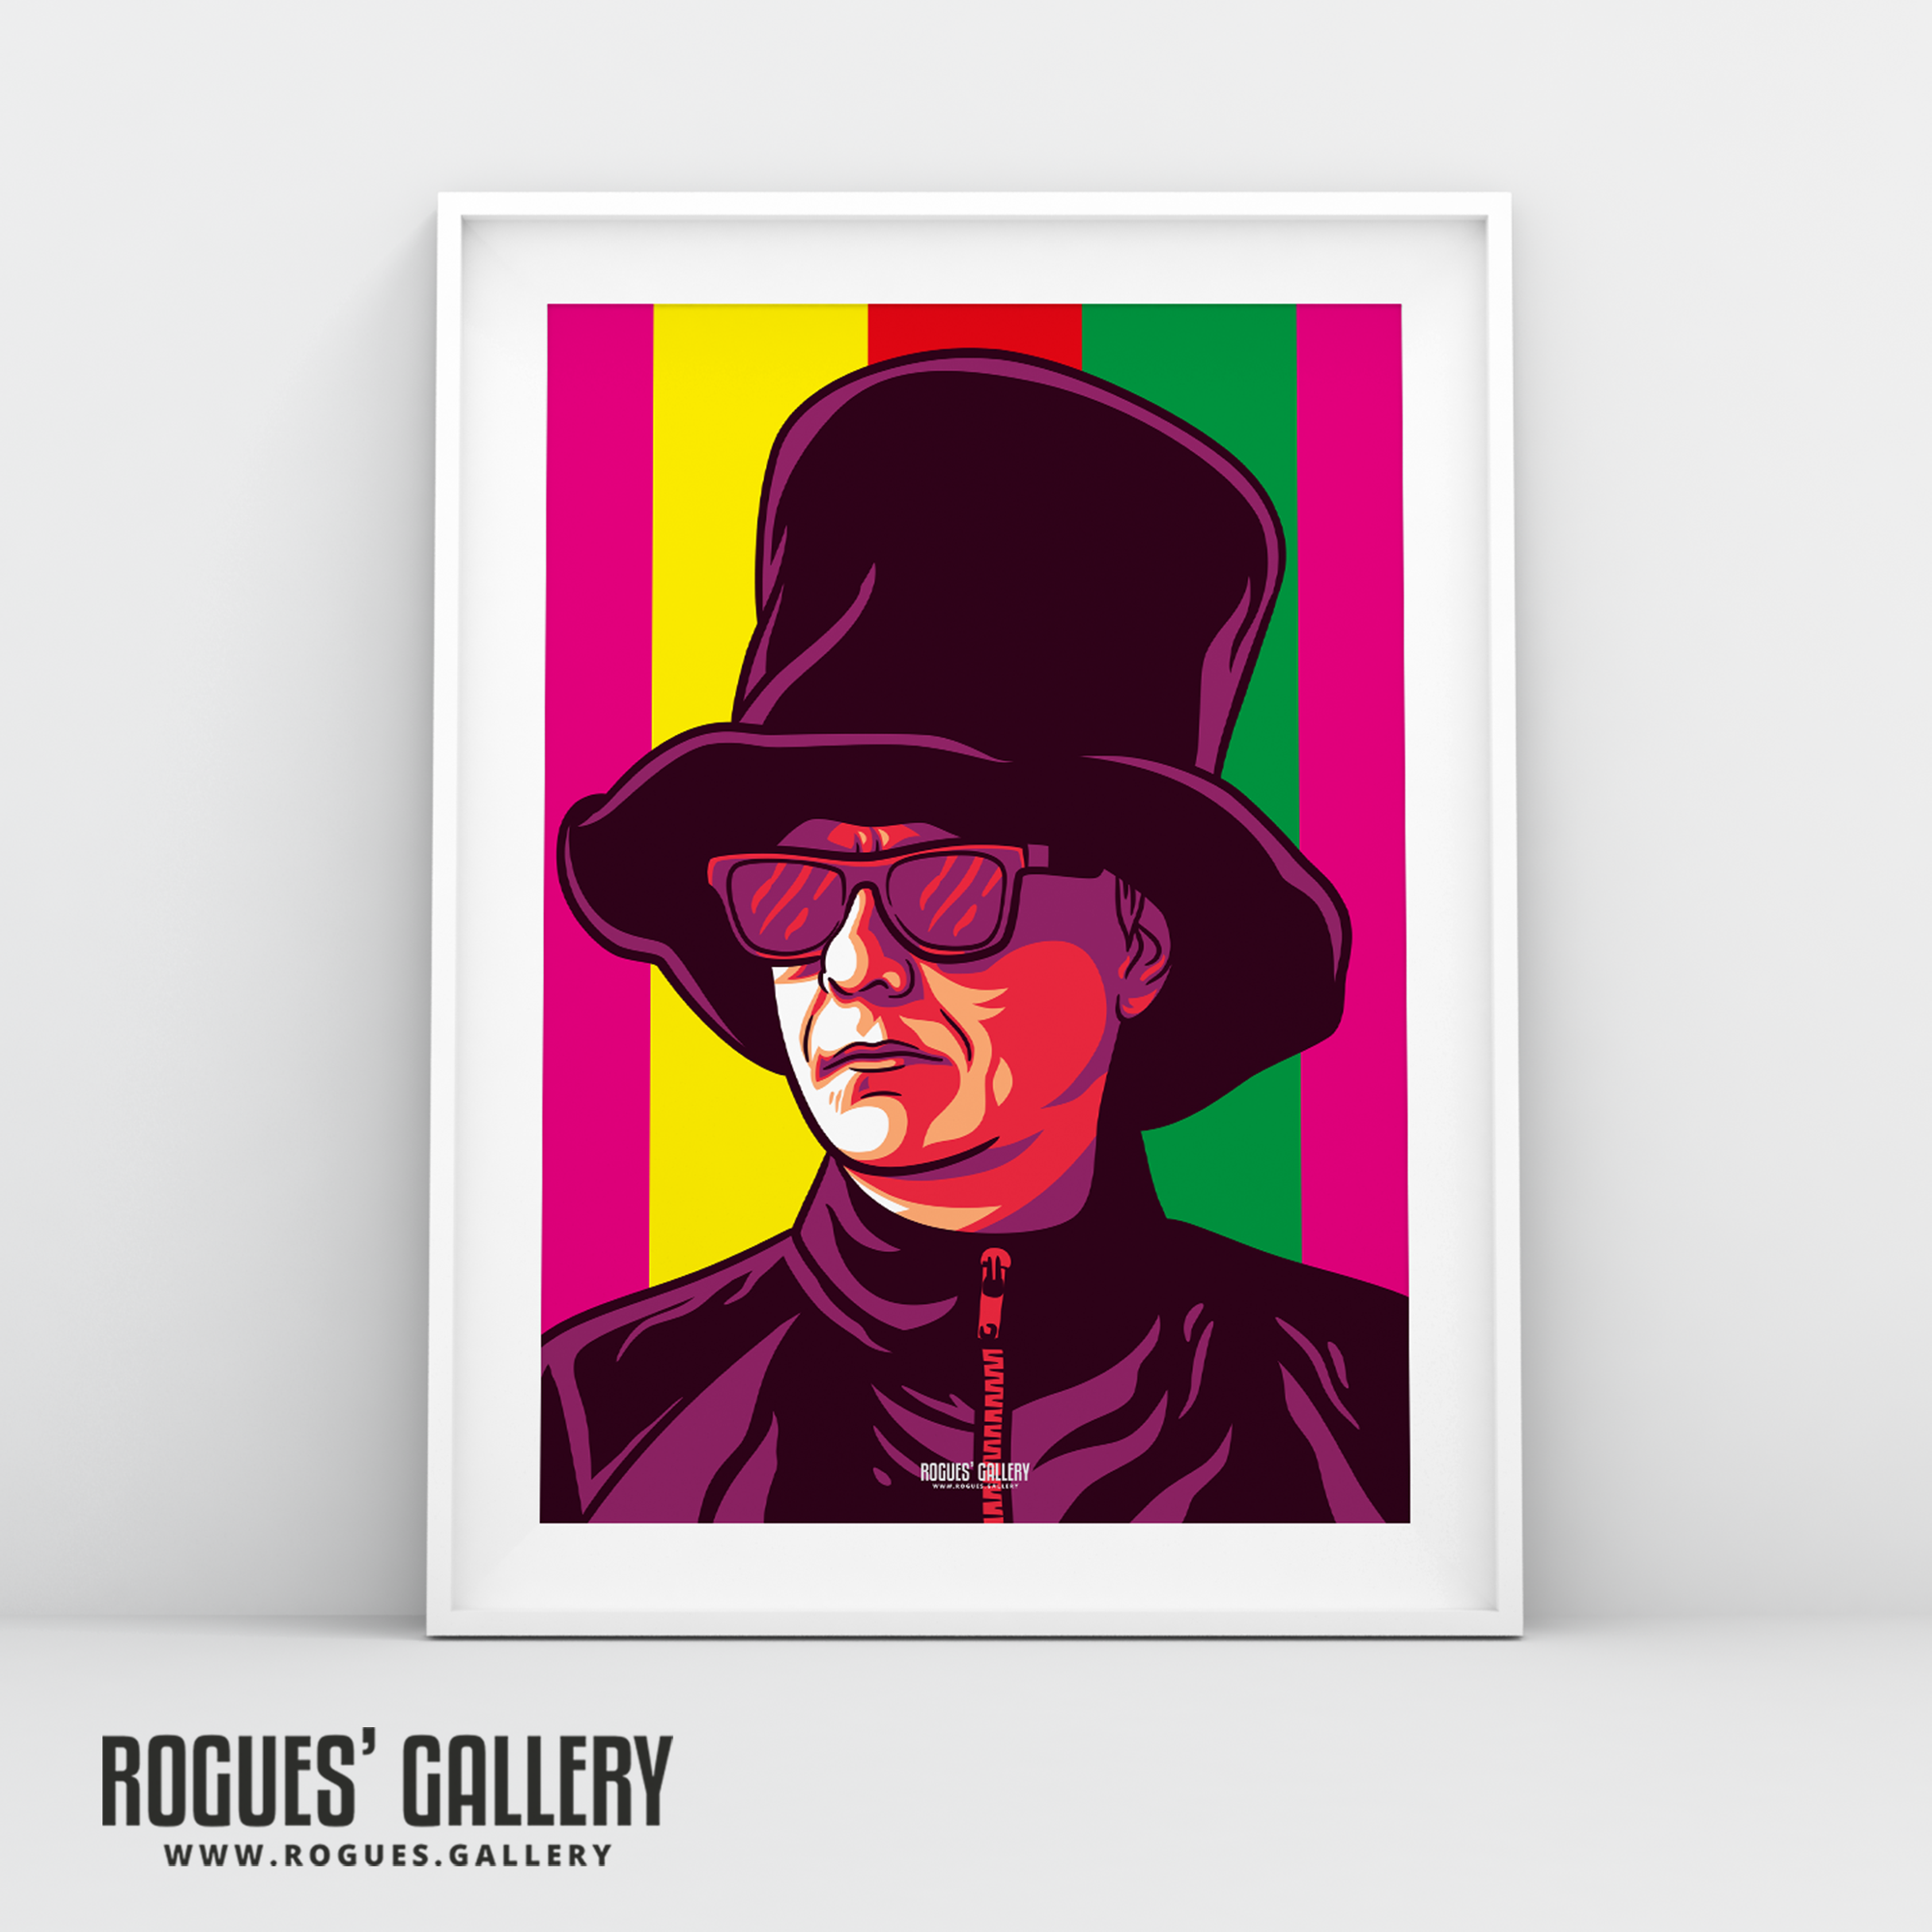 Chris Lowe Pet Shop Boys keyboards composer synth guy portrait A3 icon print west end girls